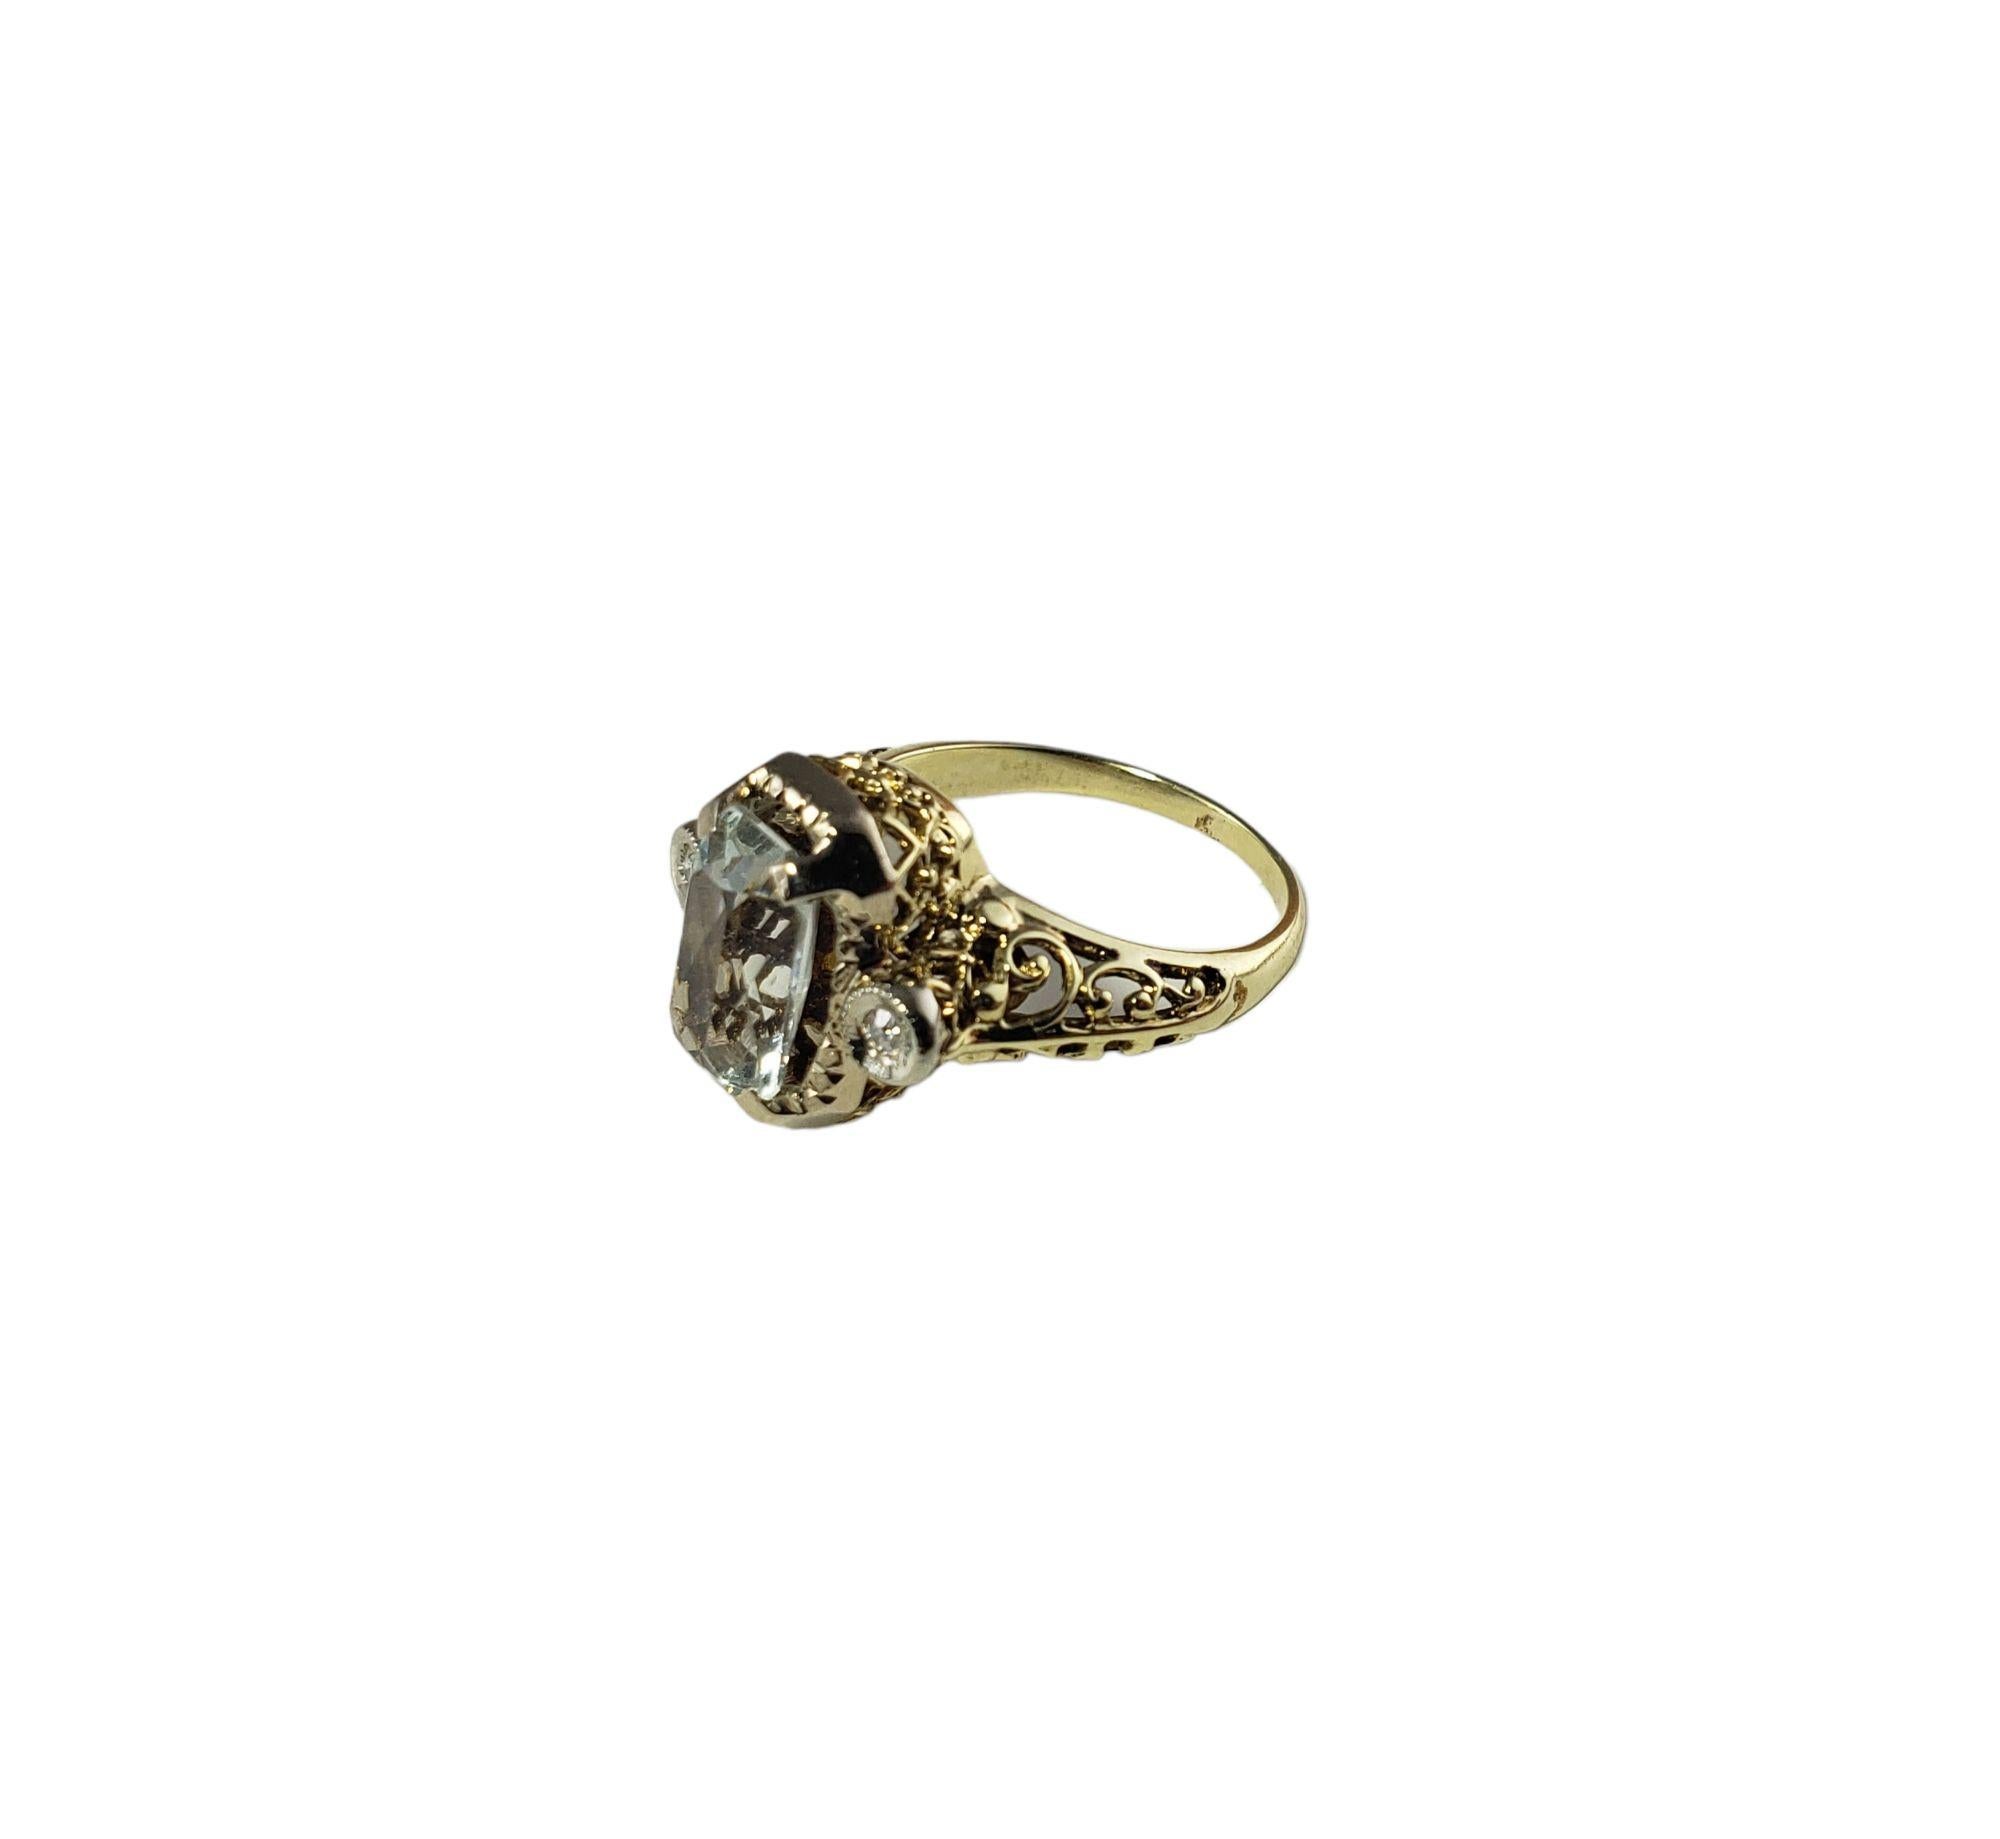 Vintage 14 Karat Yellow Gold Aquamarine and Diamond Ring Size 4.25 JAGi Certified-

This lovely ring features one aquamarine gemstone and two round single cut diamonds set in beautifully detailed 14K yellow gold. Width: 12 mm. Shank: 2